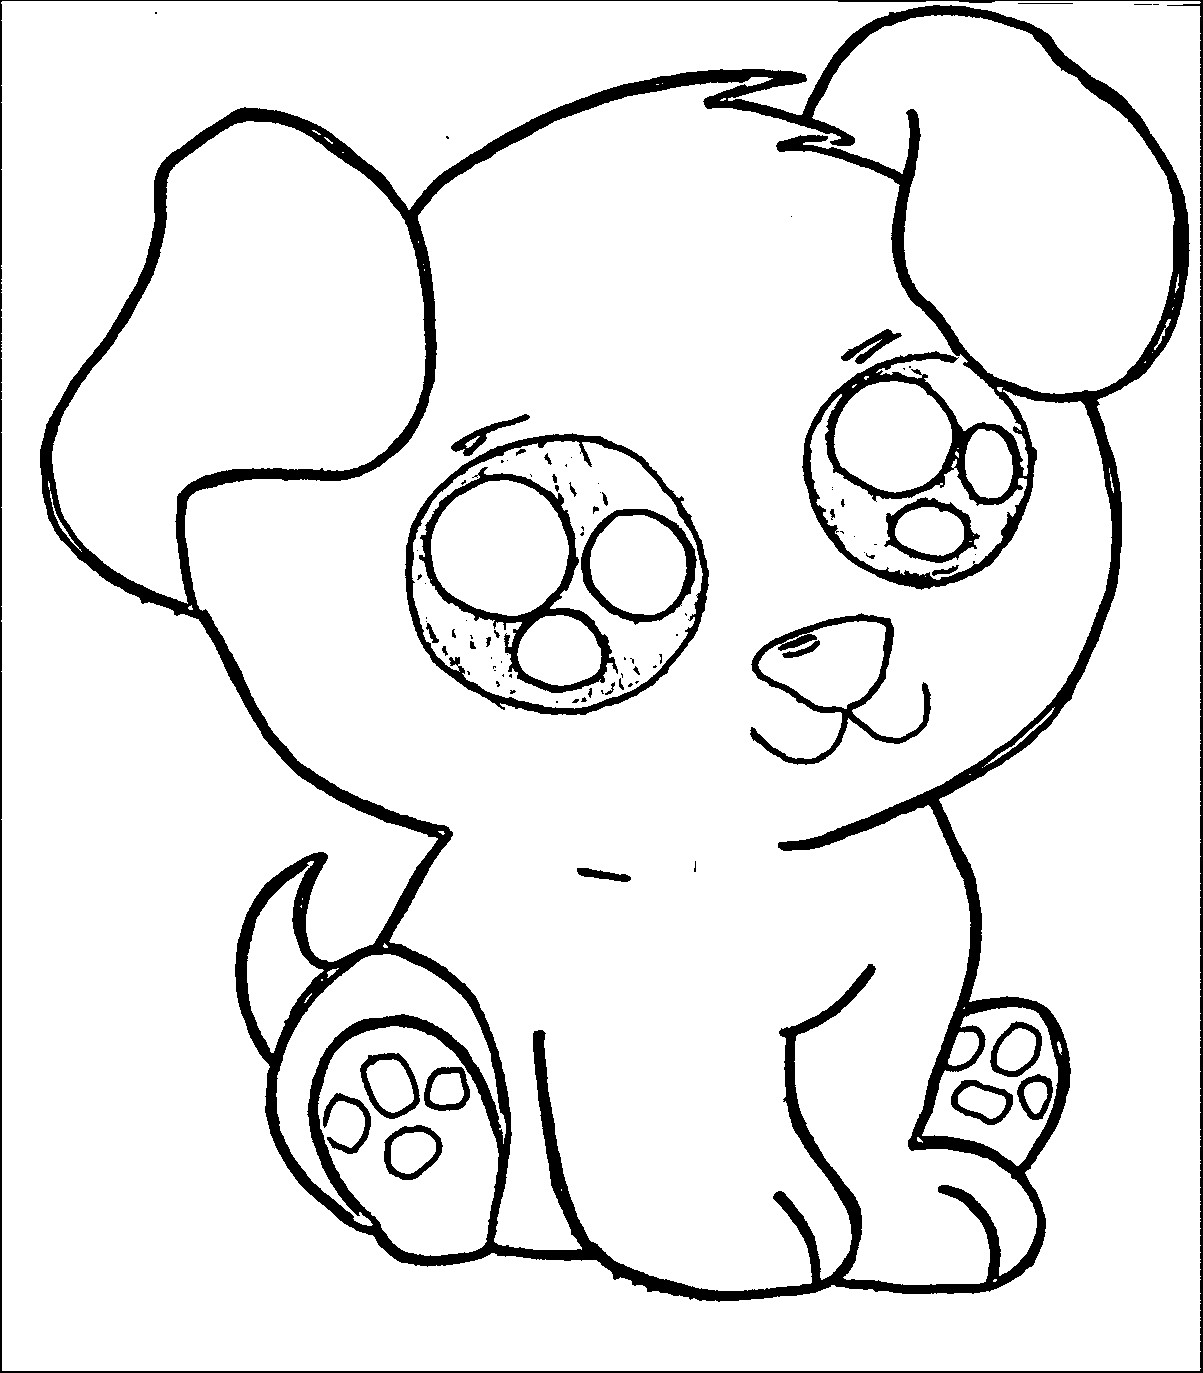 Cute Puppy Coloring Pages For Girls
 Cute Puppies Free Coloring Pages